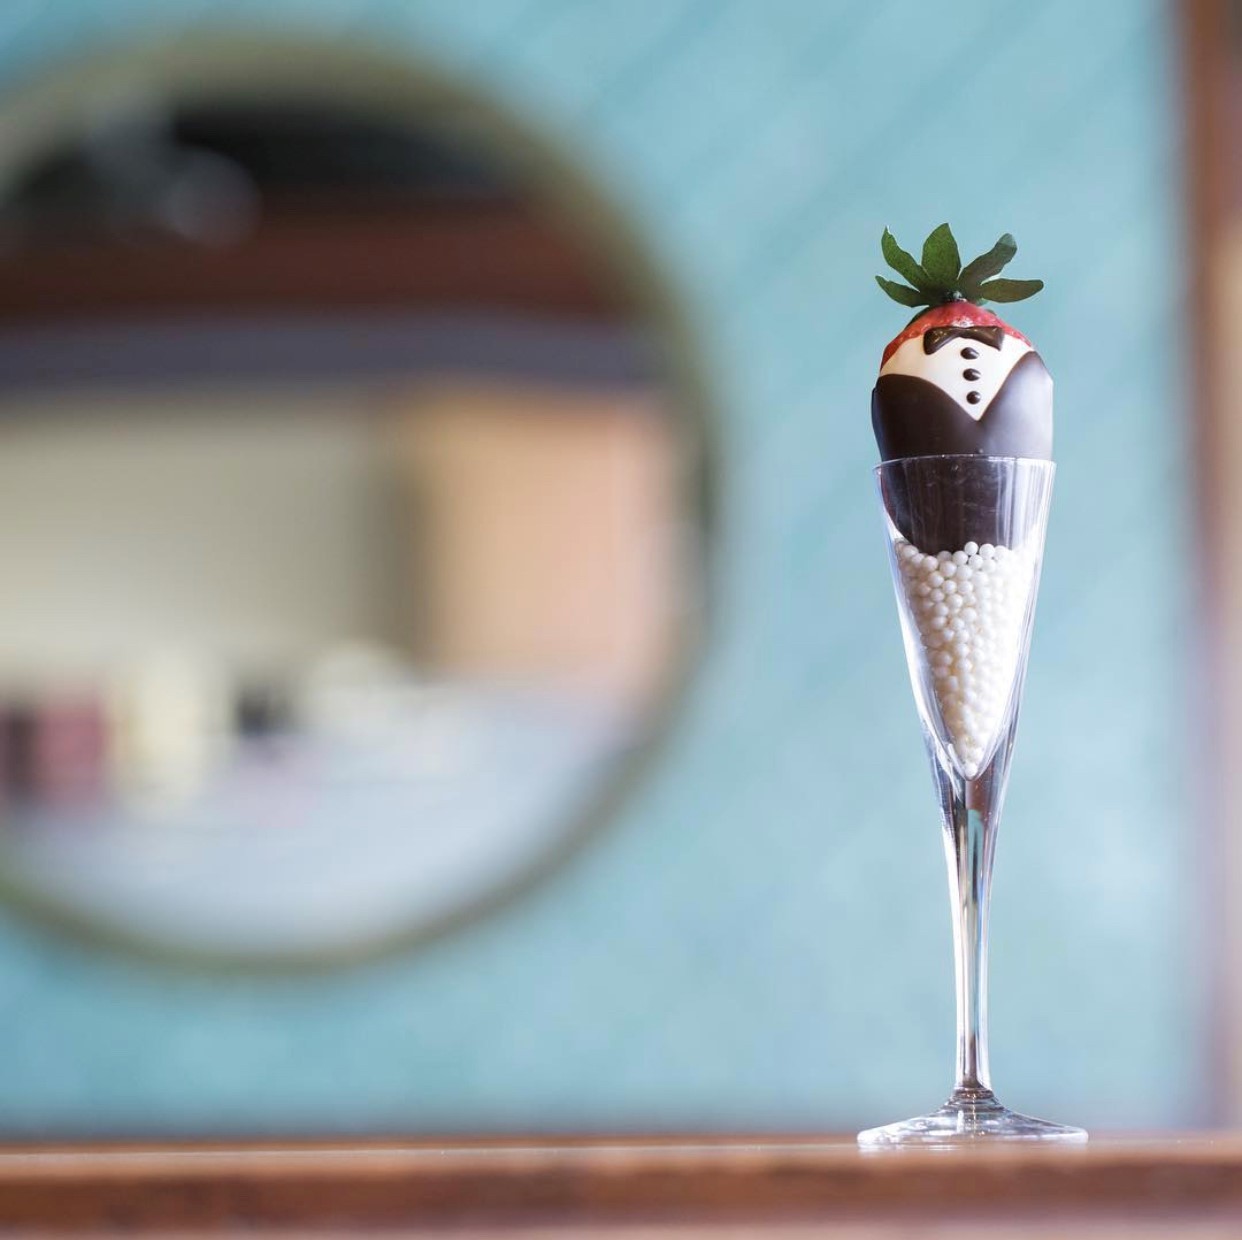 A chocolate covered strawberry sitting in a champagne flute from Jenkinson's Sweet Shop.